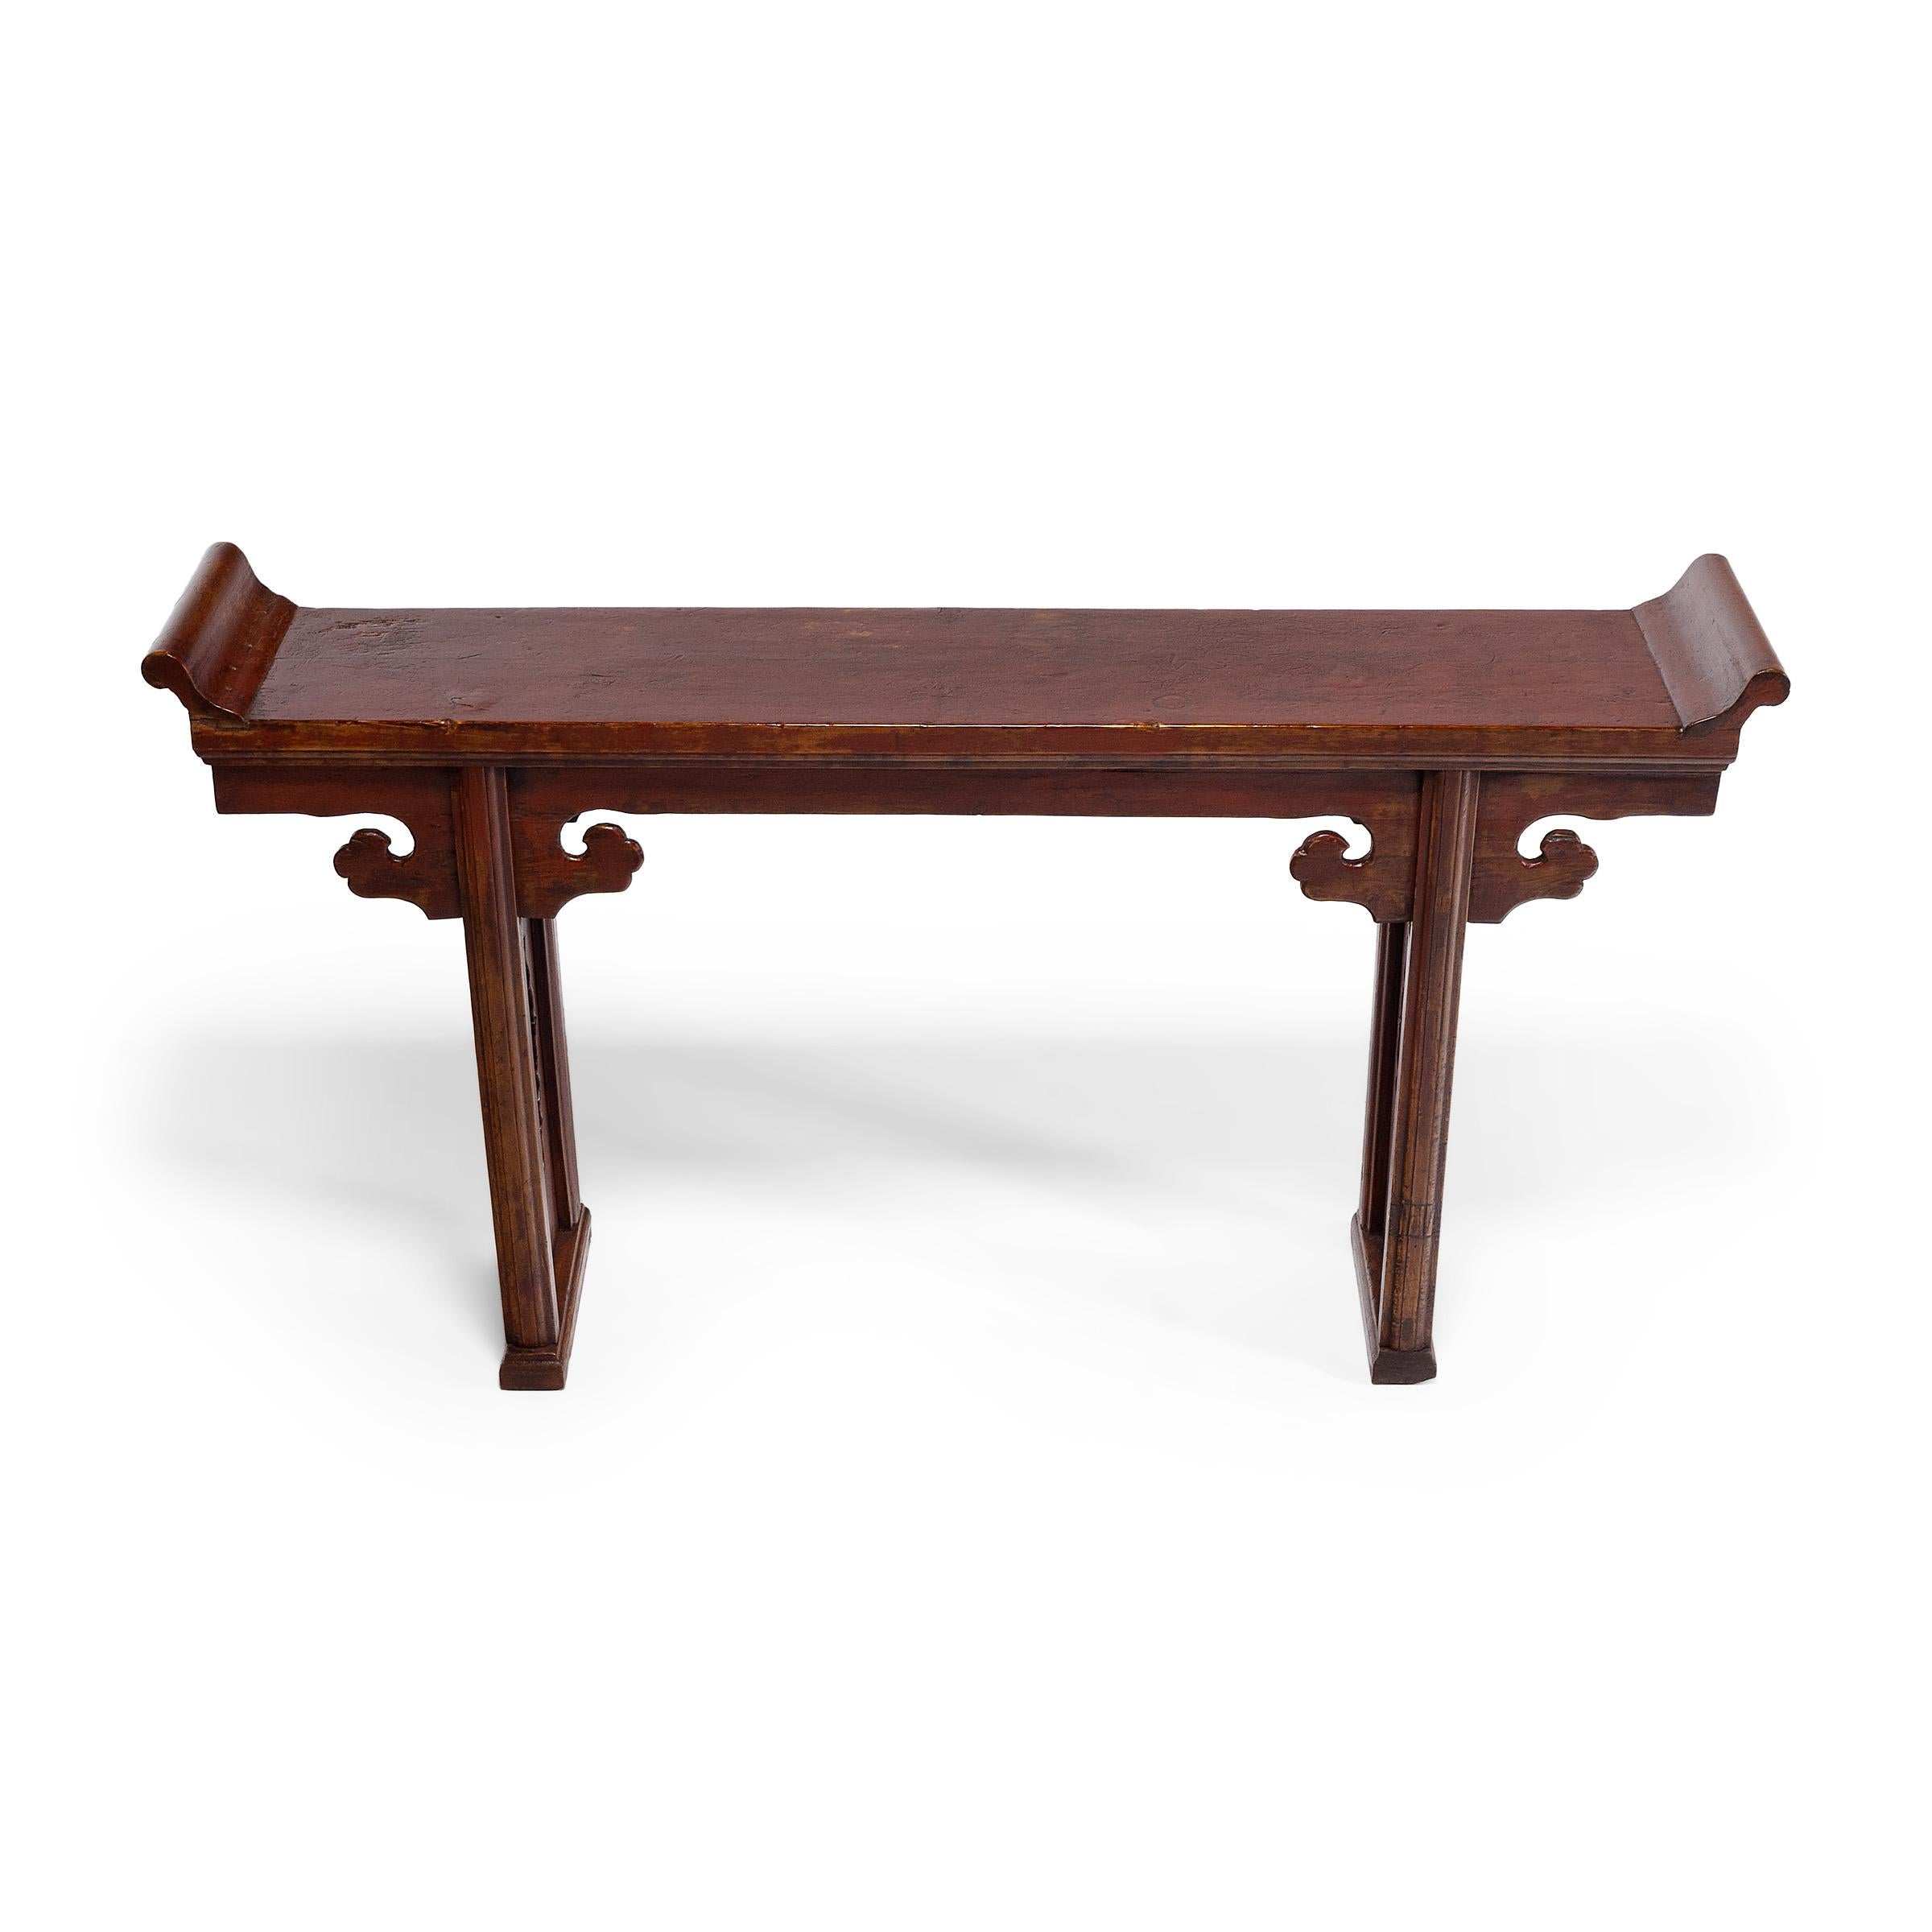 19th Century Chinese Red Lacquer Altar Table, c. 1850